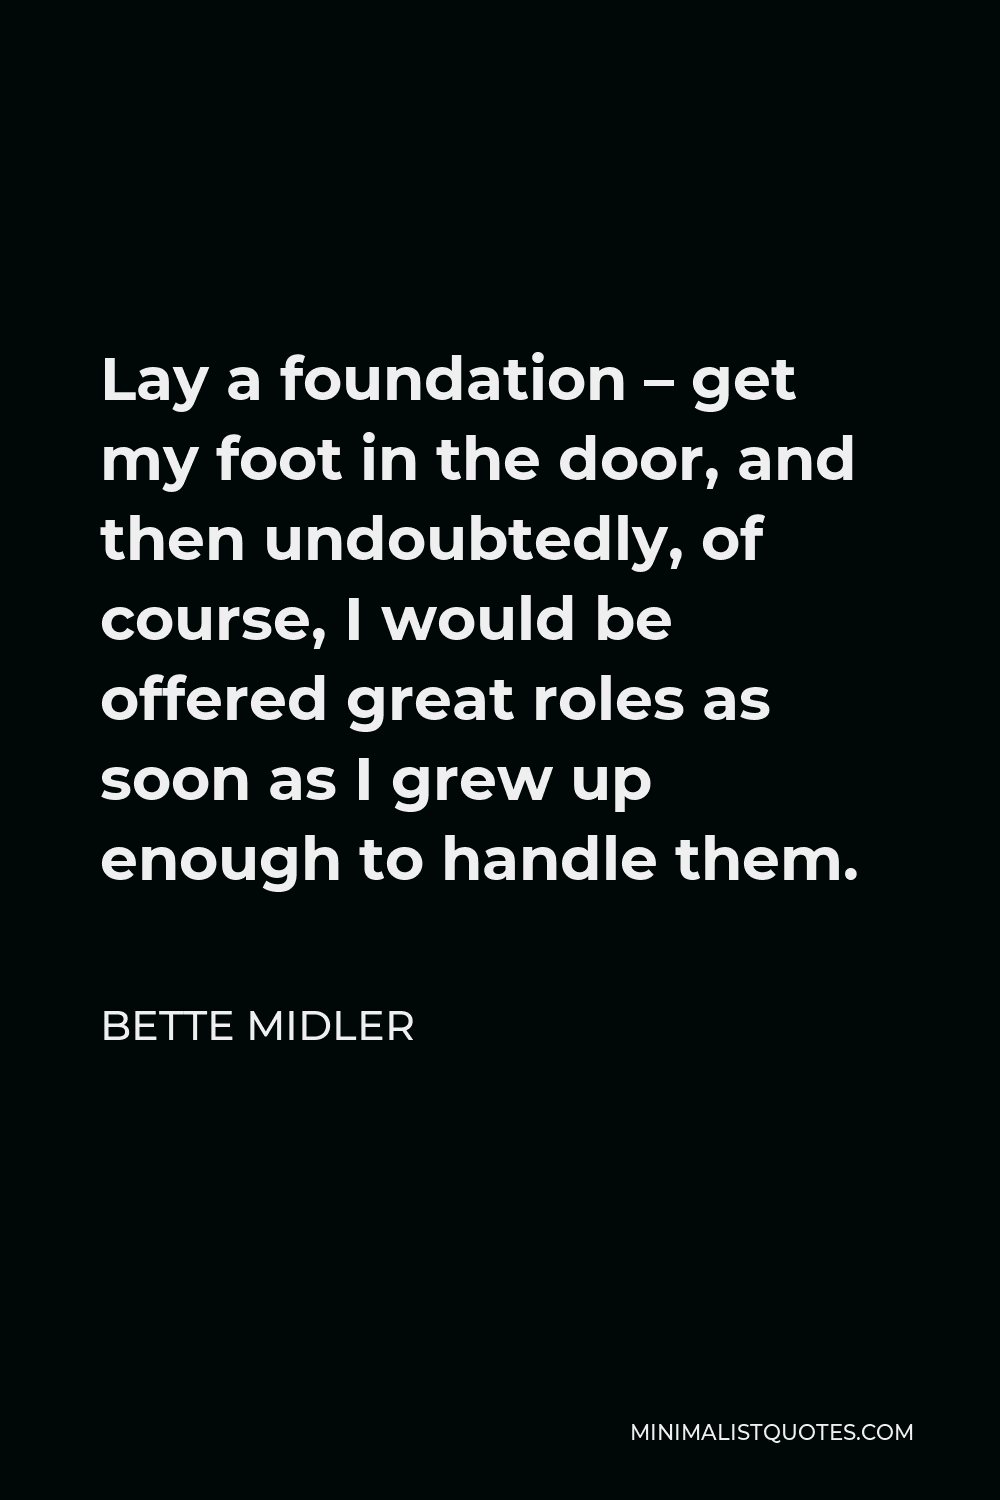 Bette Midler Quote - Lay a foundation – get my foot in the door, and then undoubtedly, of course, I would be offered great roles as soon as I grew up enough to handle them.